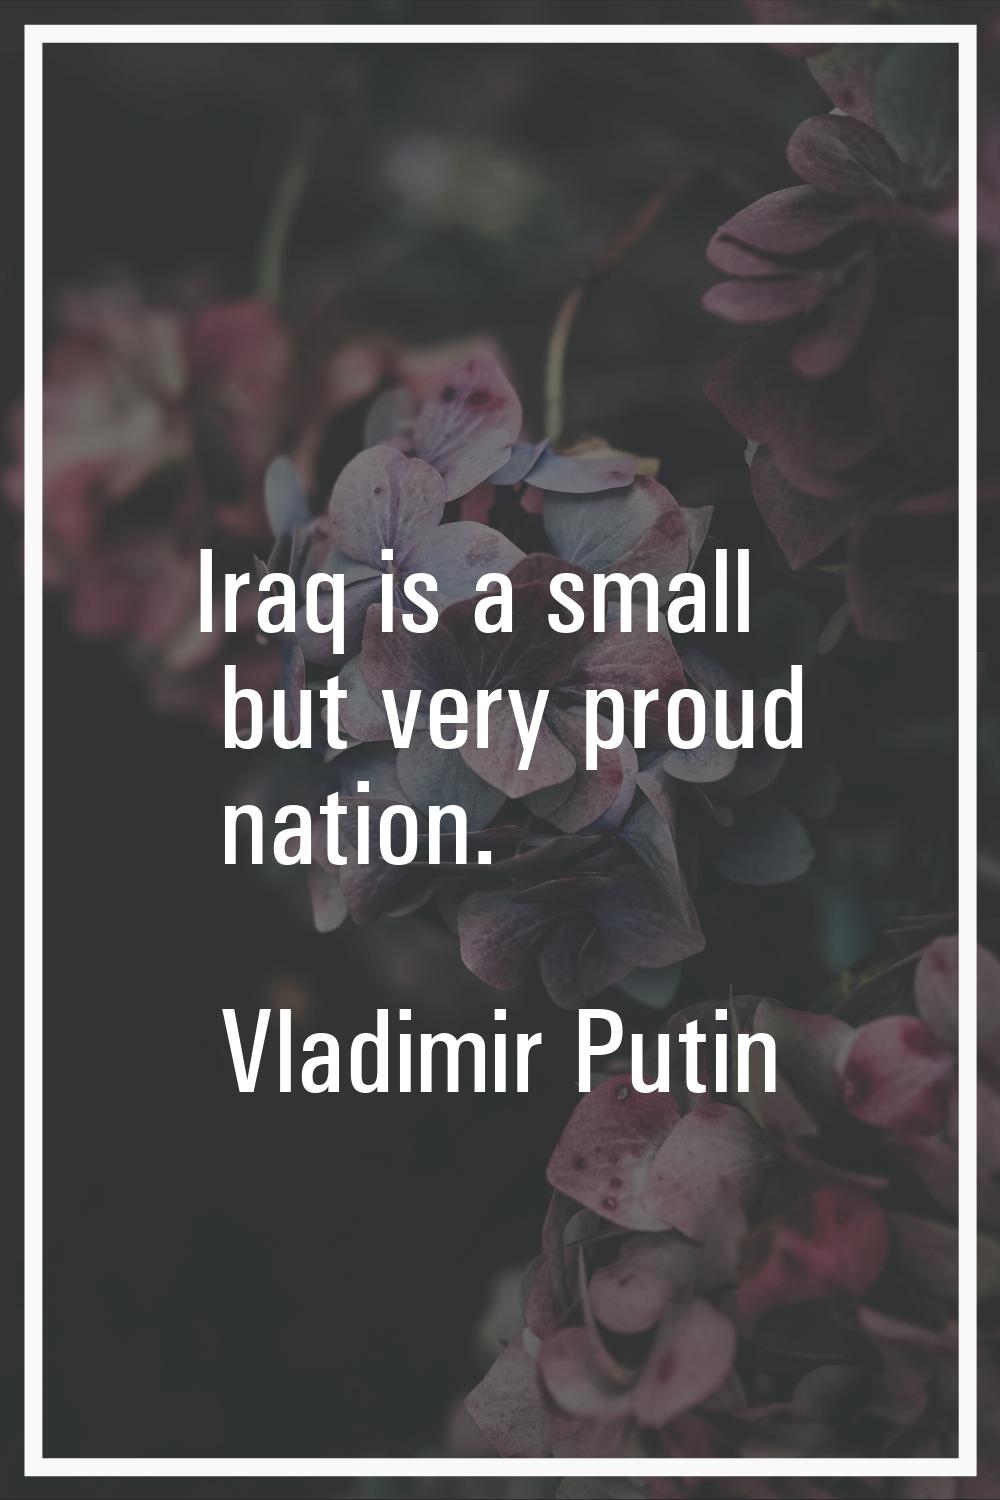 Iraq is a small but very proud nation.